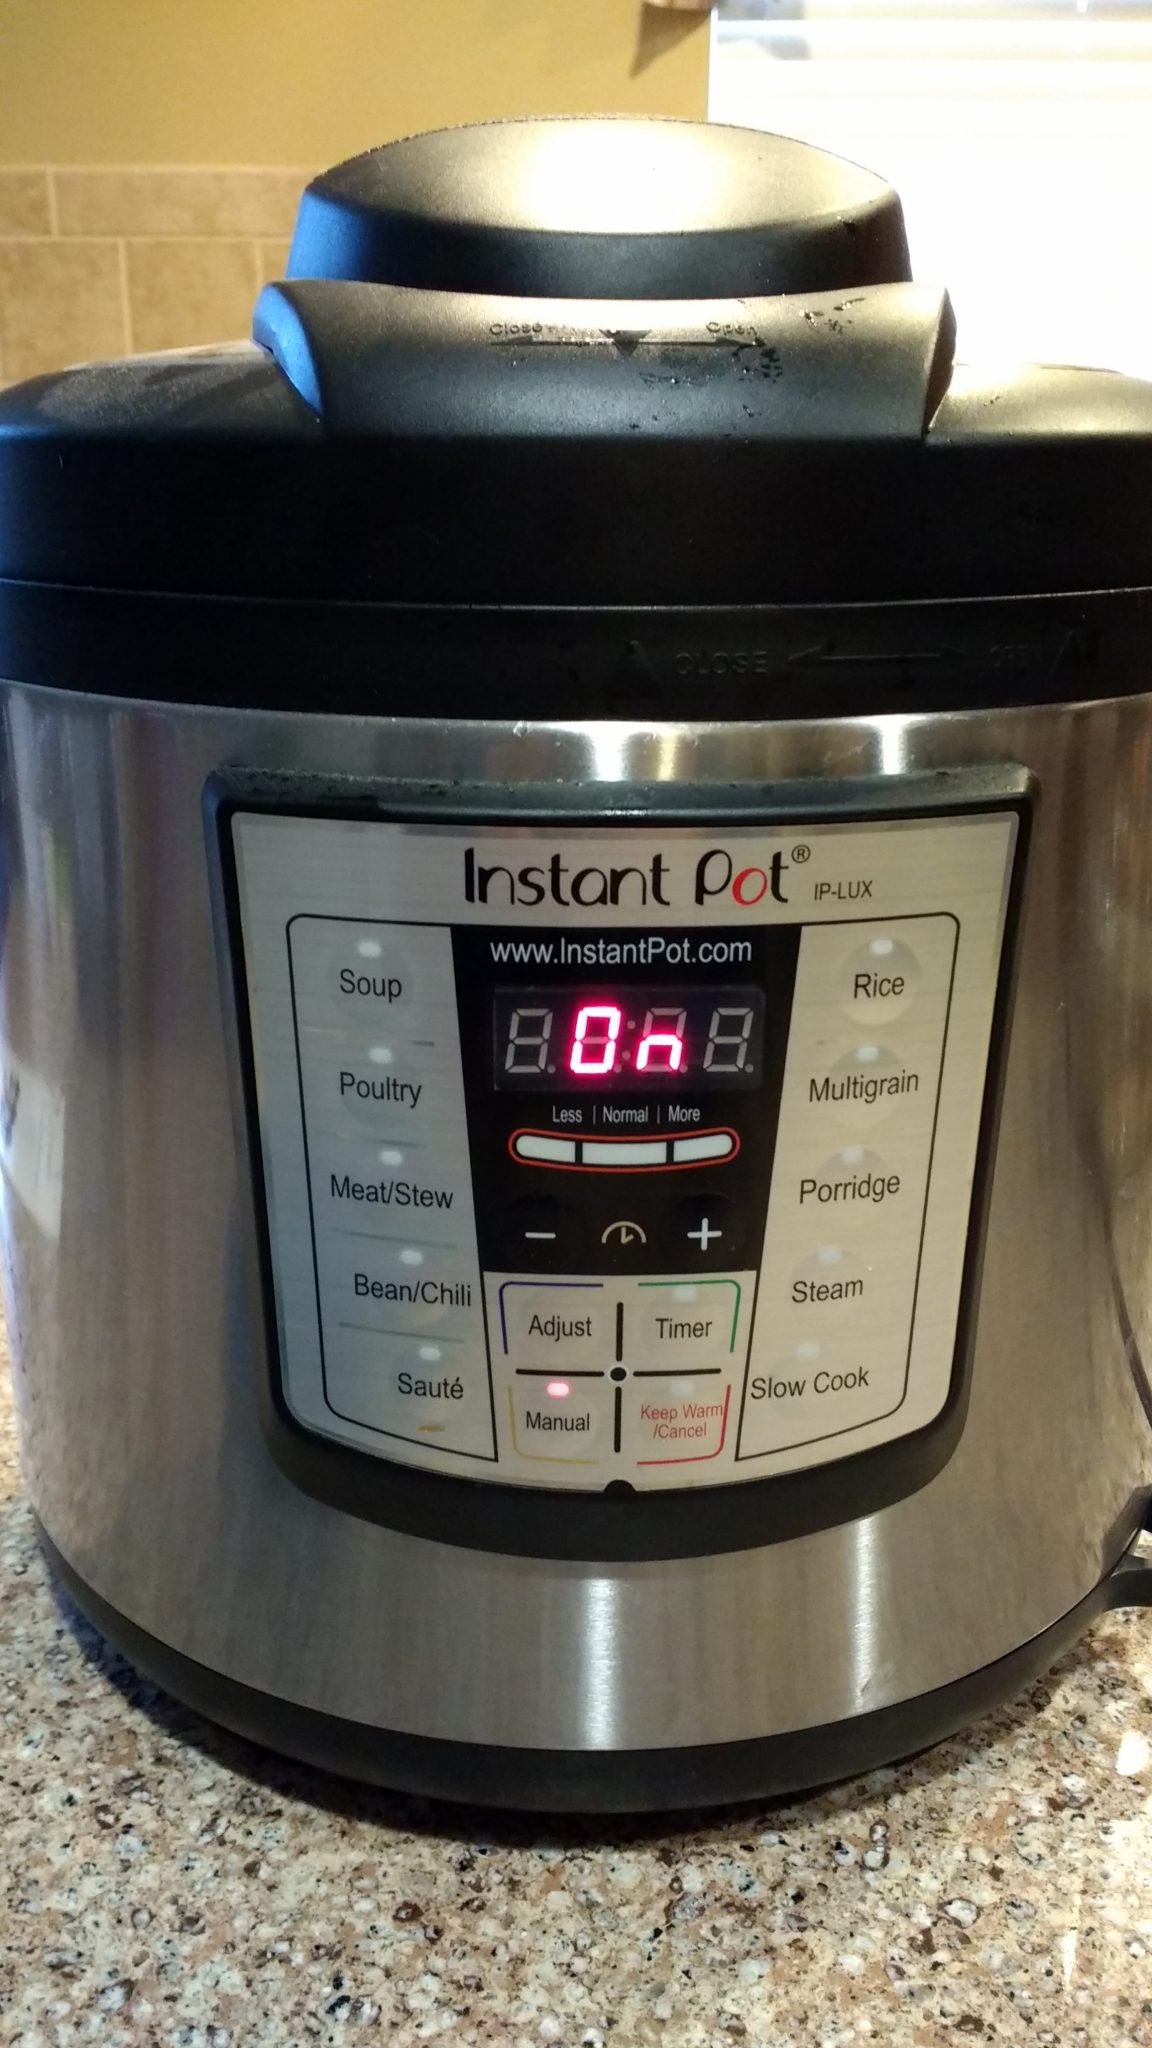 Instant Pot: Cooking Fad or Kitchen Staple? | Mommy Runs It